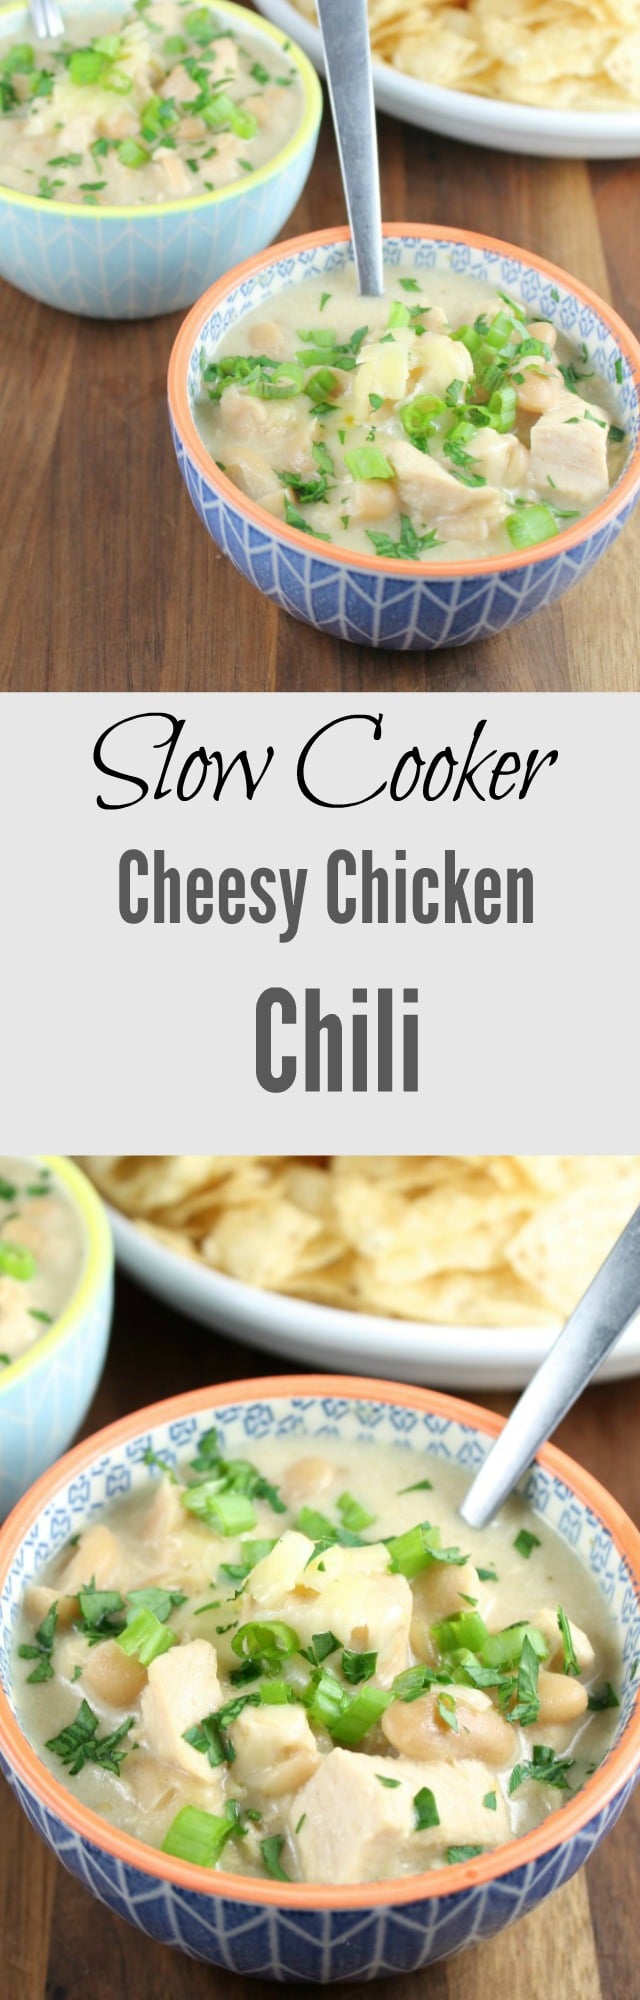 Slow Cooker Cheesy Chicken Chili